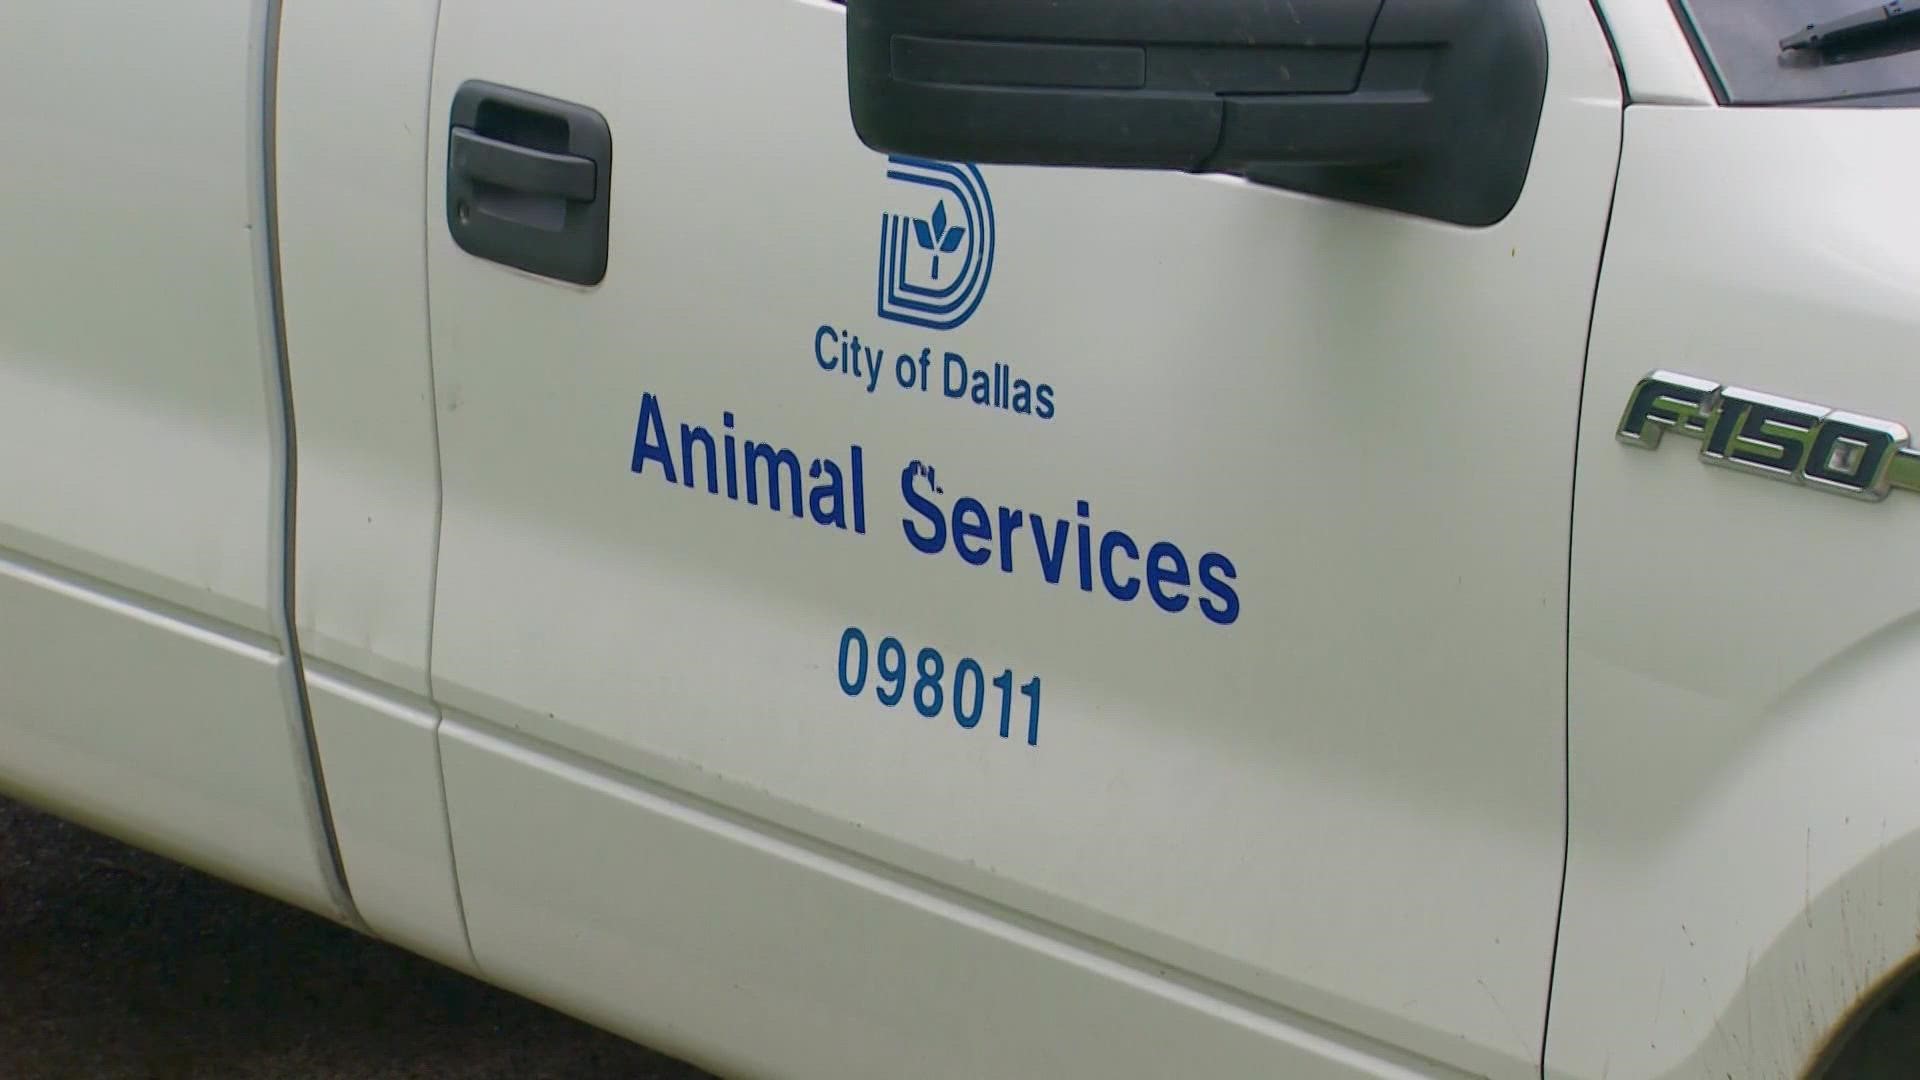 Six weeks after a 2-year-old boy was attacked, Dallas Animal Services released a draft of a coyote management plan.